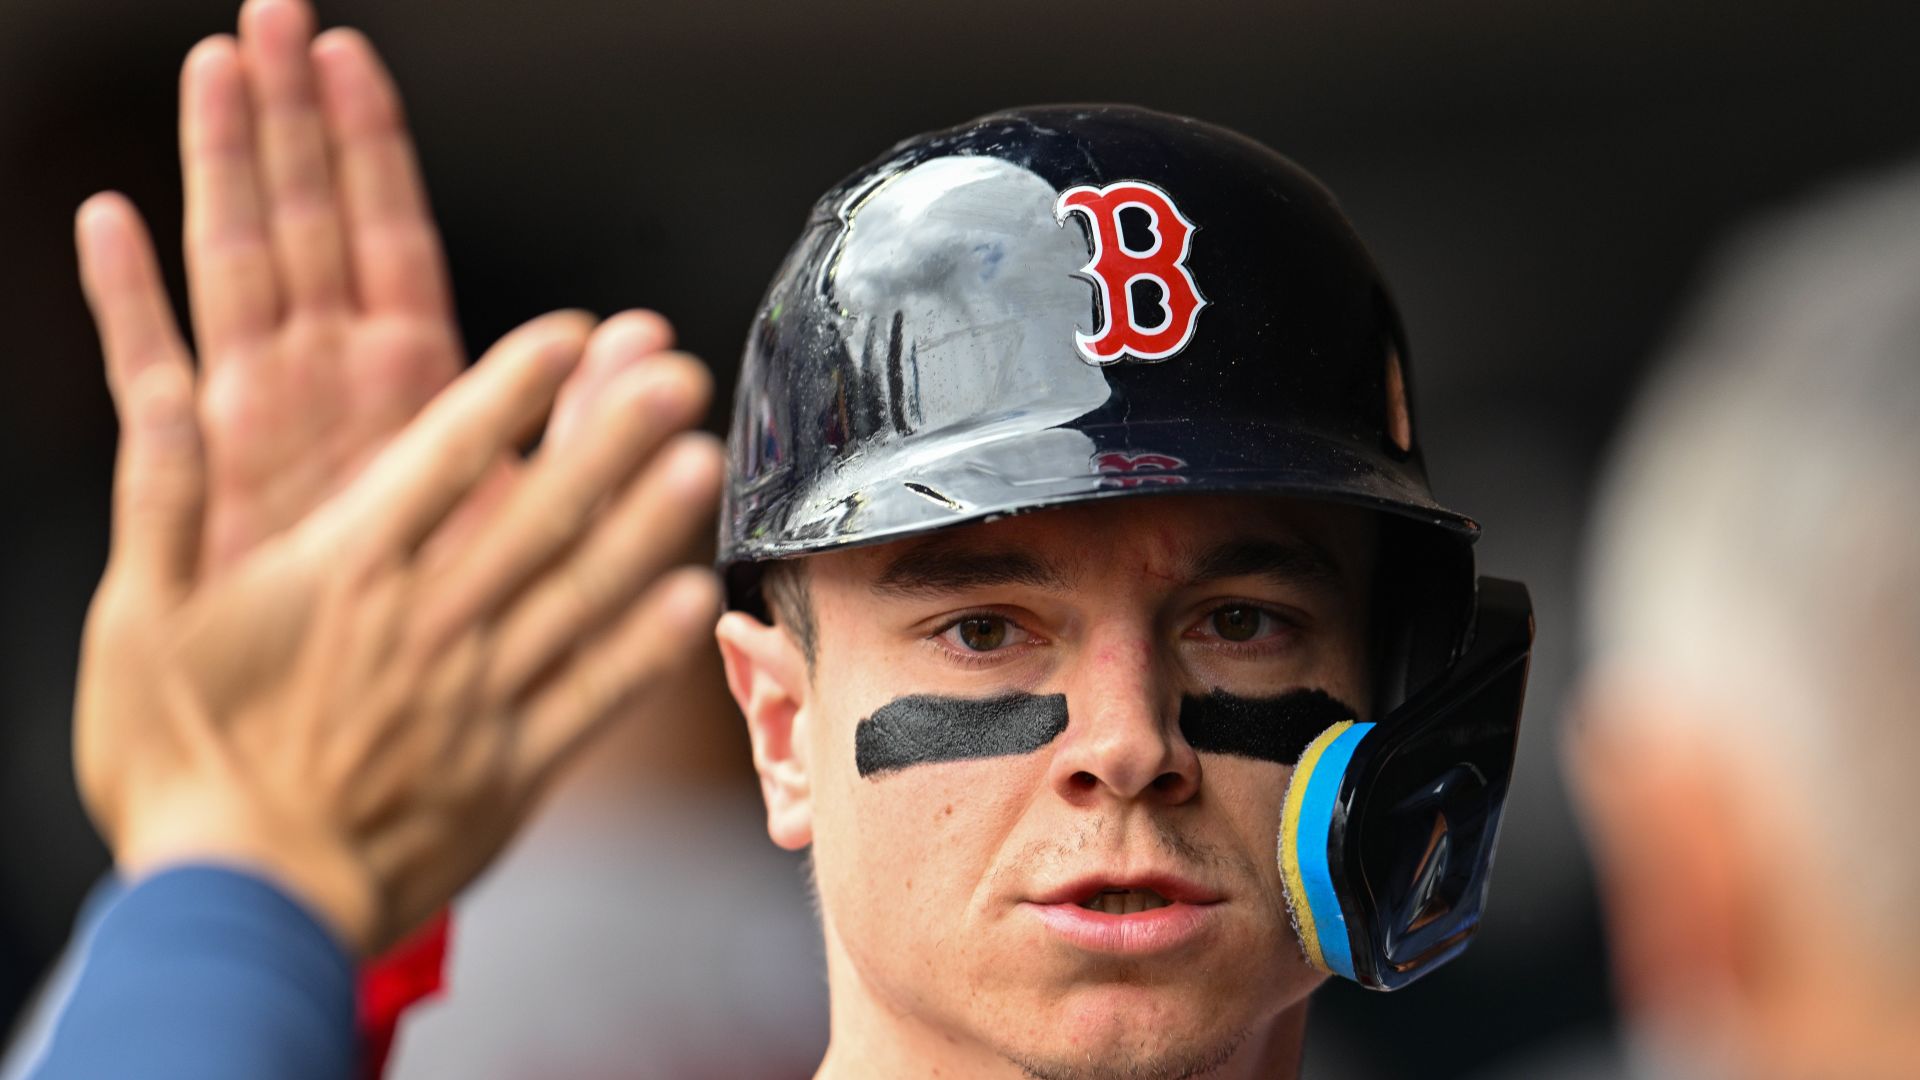 How Tyler O’Neill Feels About Red Sox Teammates’ ‘Intense’
Label